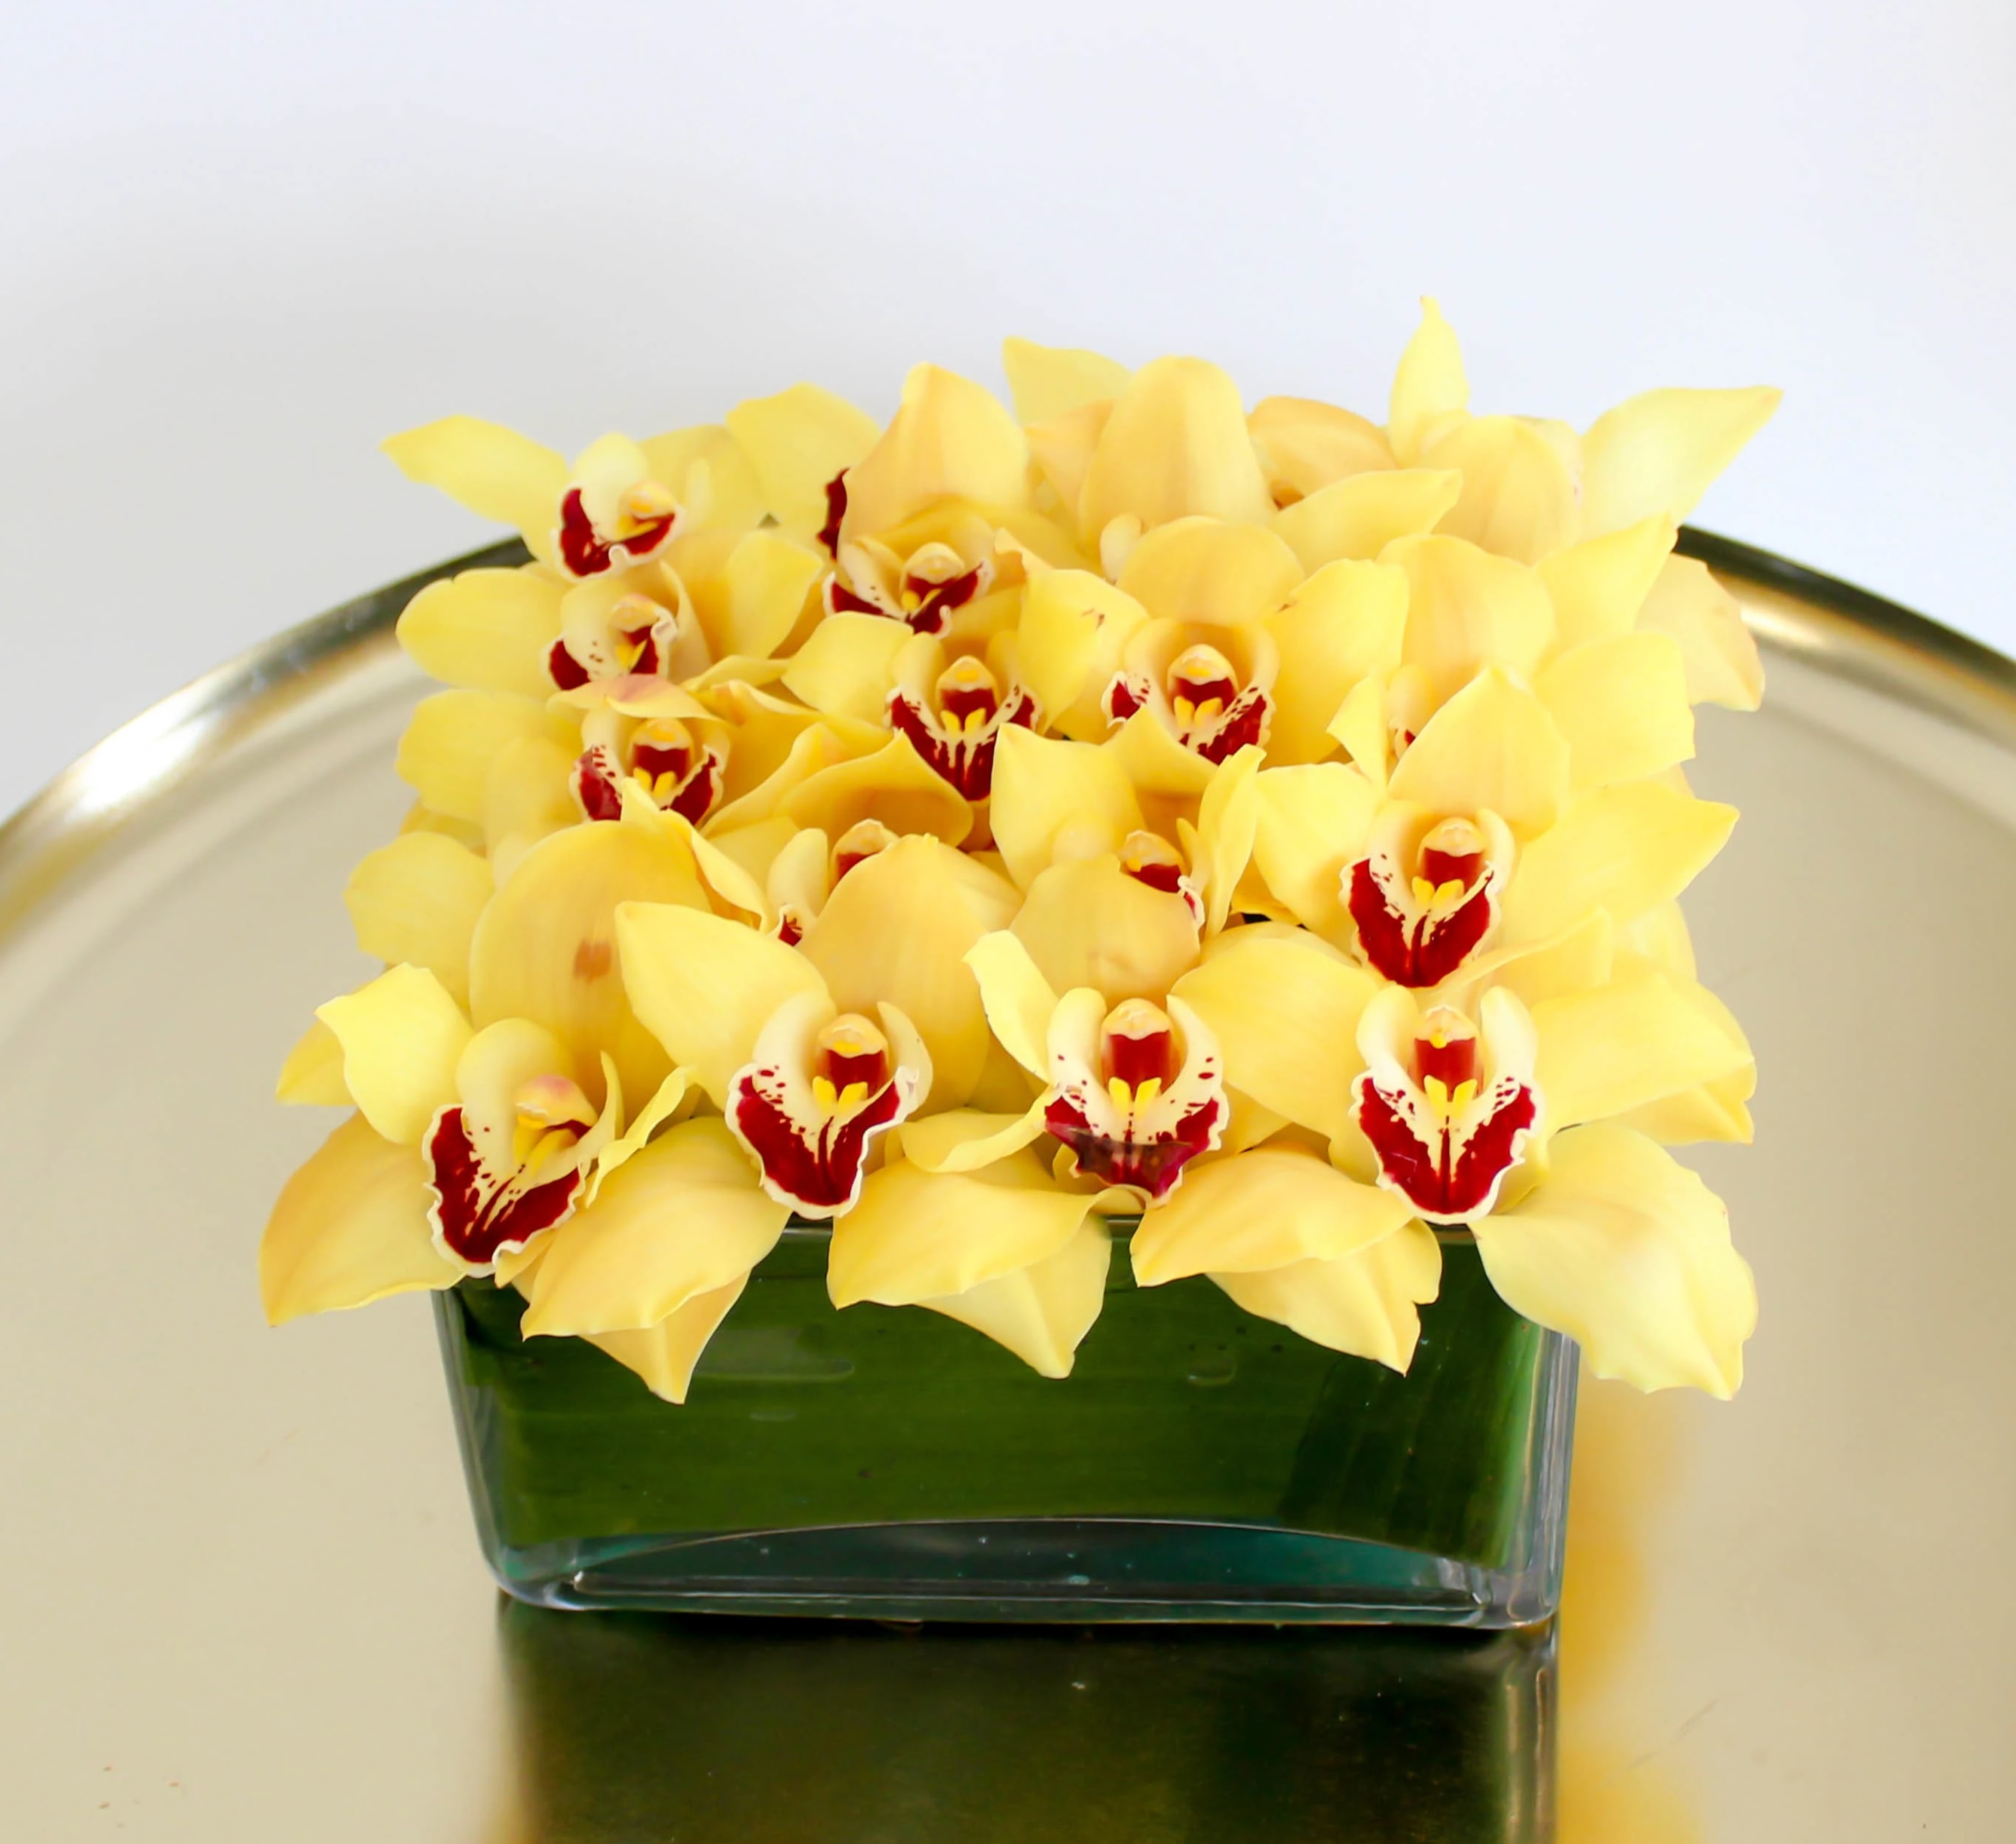 Orchidmoore - Vibrant and elegant, rows of sunshine yellow tropical cymbidium orchids are designed in a perfect square. This pillow of orchids is nestled in a low glass container, leaf-lined for a classic &amp; sophisticated look. Measurement:  standard- appx. 8”w x 8”d x 7&quot;h  deluxe- appx. 10”w x 10”d x 8”h  premium- appx. 12”w x 12”d x 9”h 